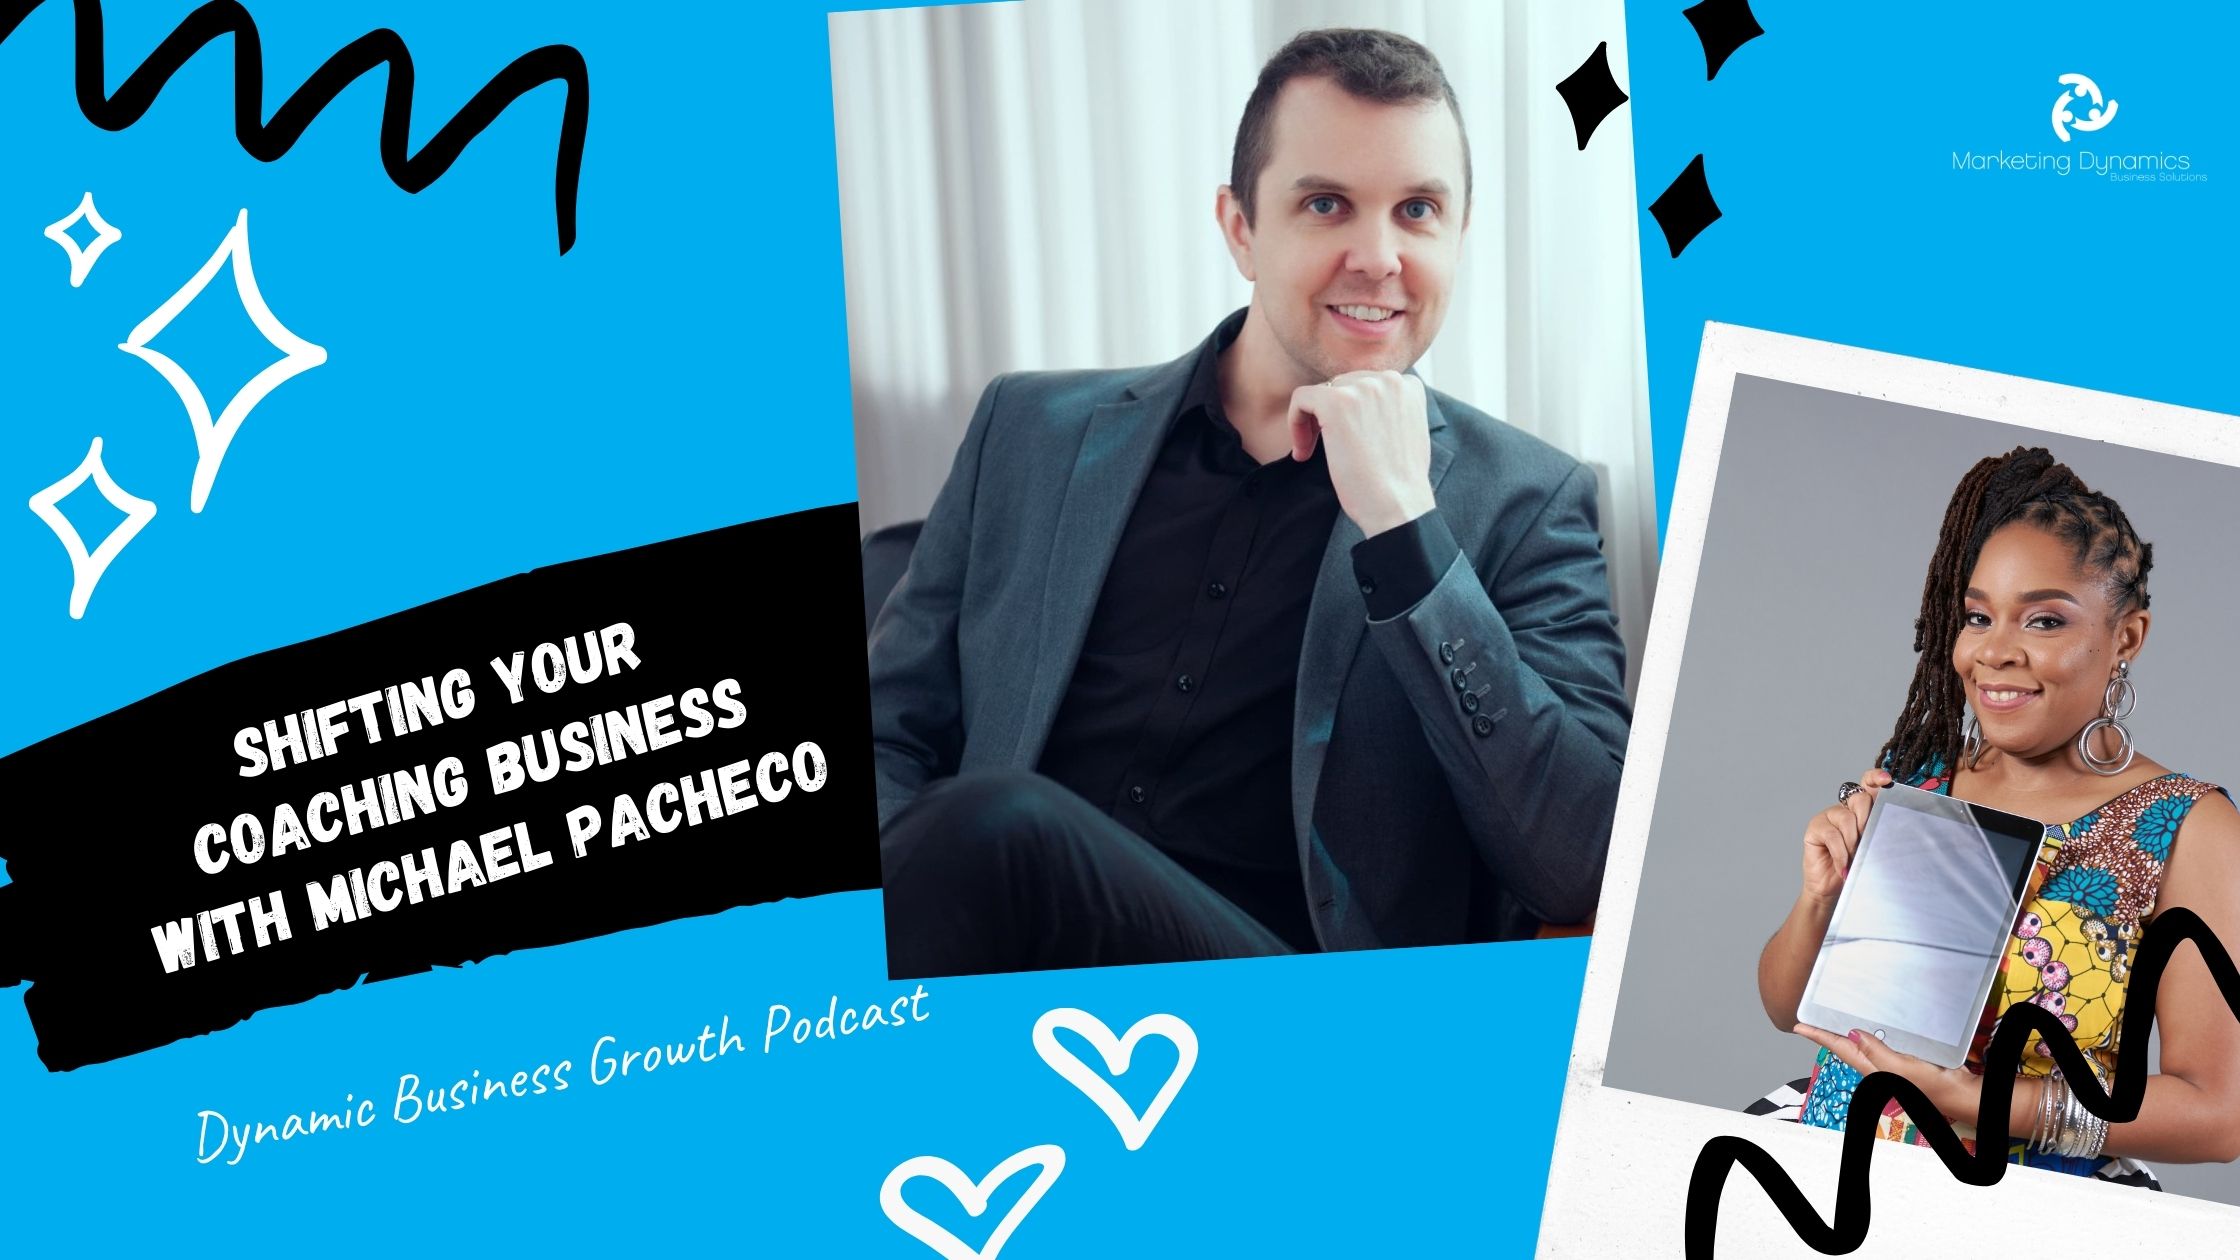 Shifting Your Coaching Business With Michael Pacheco